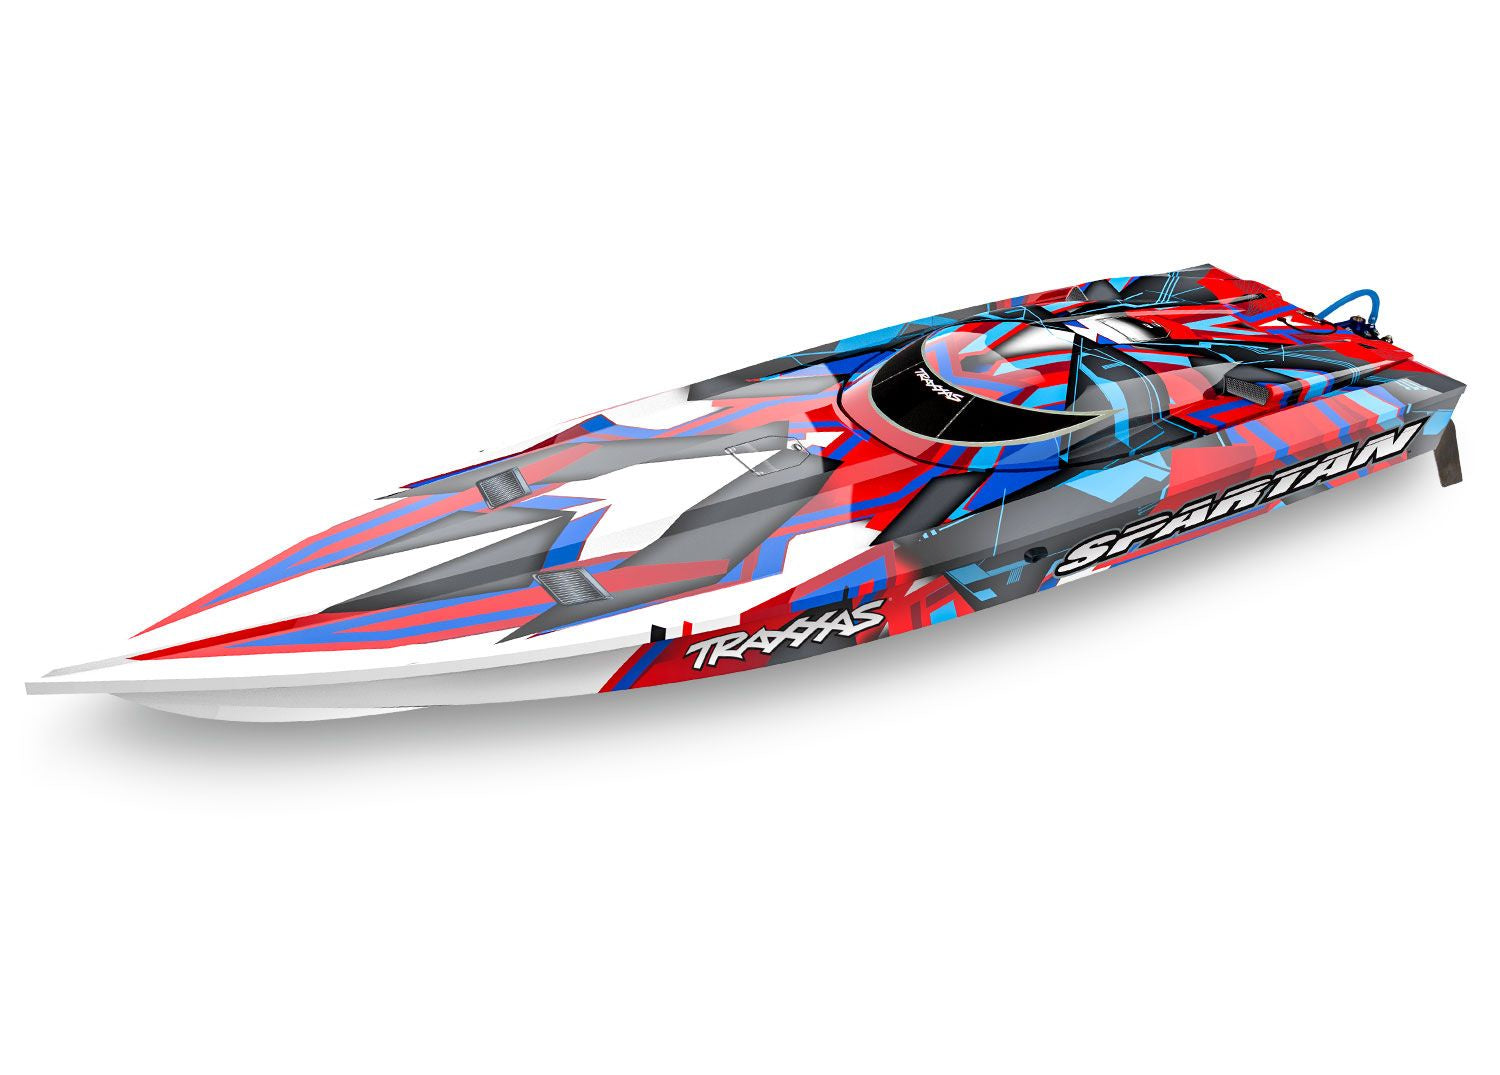 Red Spartan: Brushless 36" Race Boat with TQi™ Traxxas Link™ Enabled 2.4GHz Radio System and Traxxas Stability Management (TSM)®